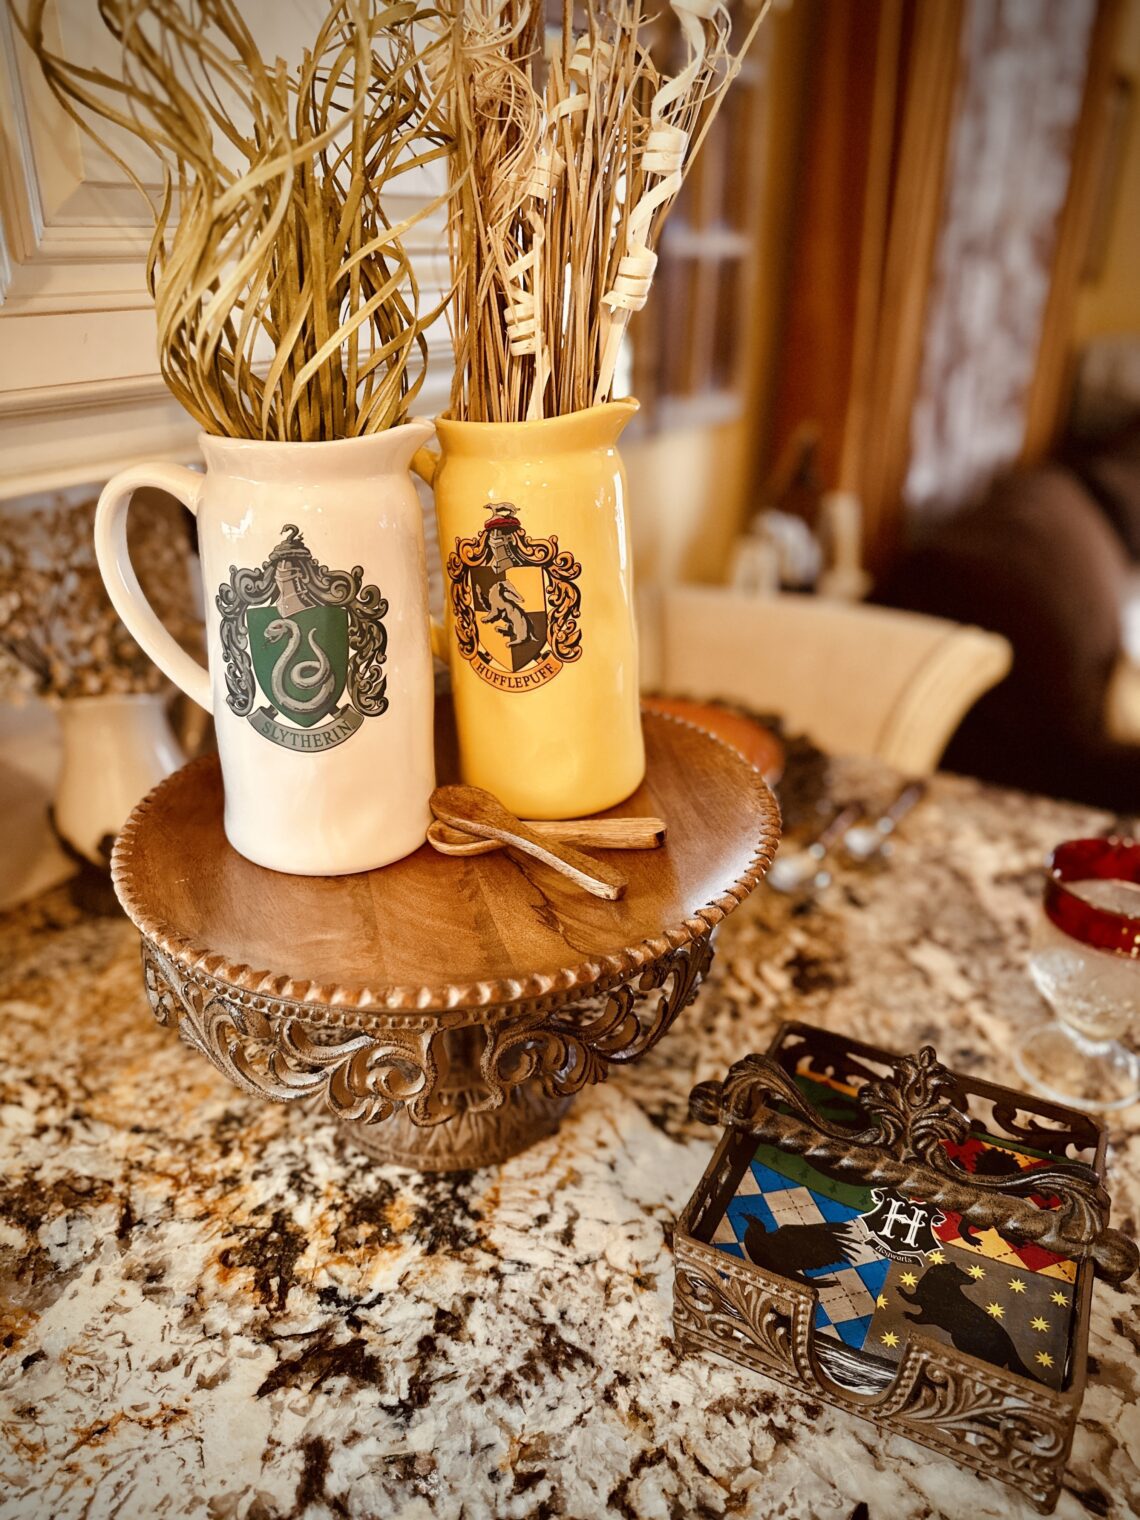 Hogwarts Harry Potter Quidditch Candles LED flickering soft glow on brass candle sticks table centerpiece hogwarts house crest plates harry potter peel and stick decals